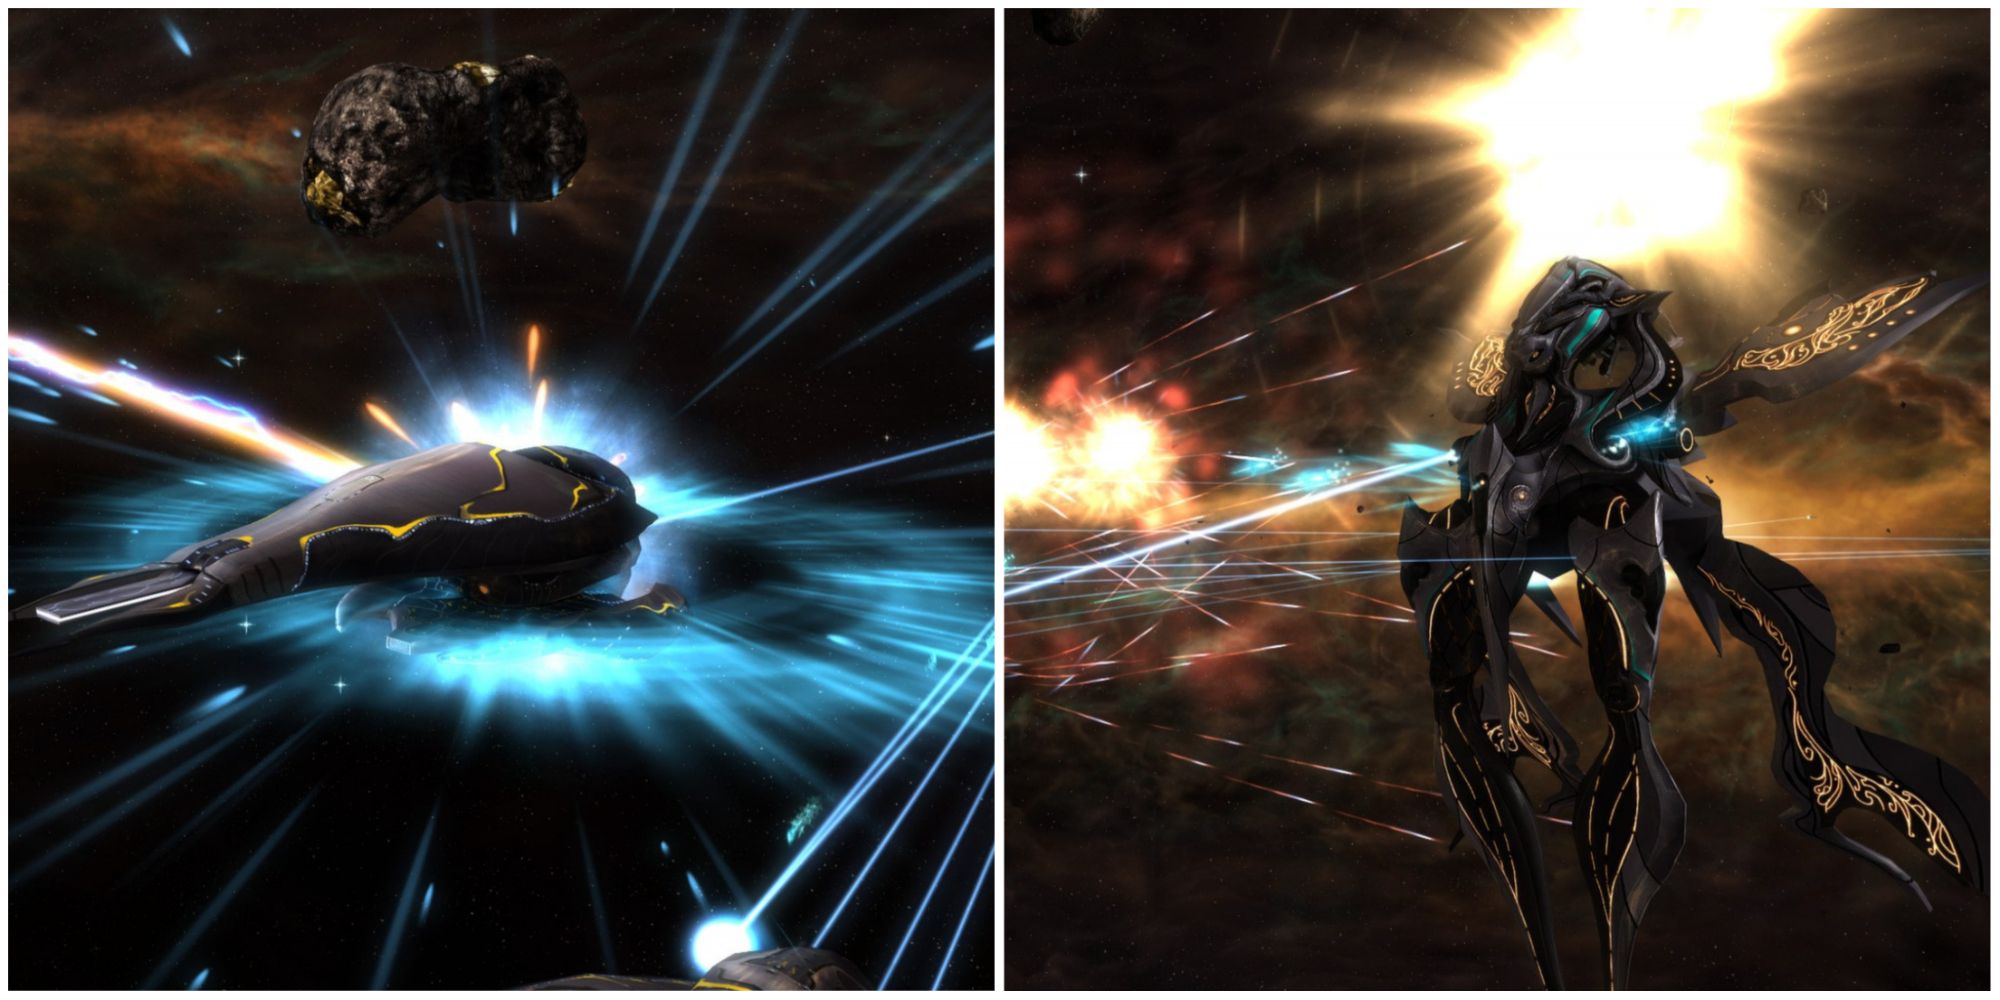 Sins Of A Solar Empire collage of two large-scale battles